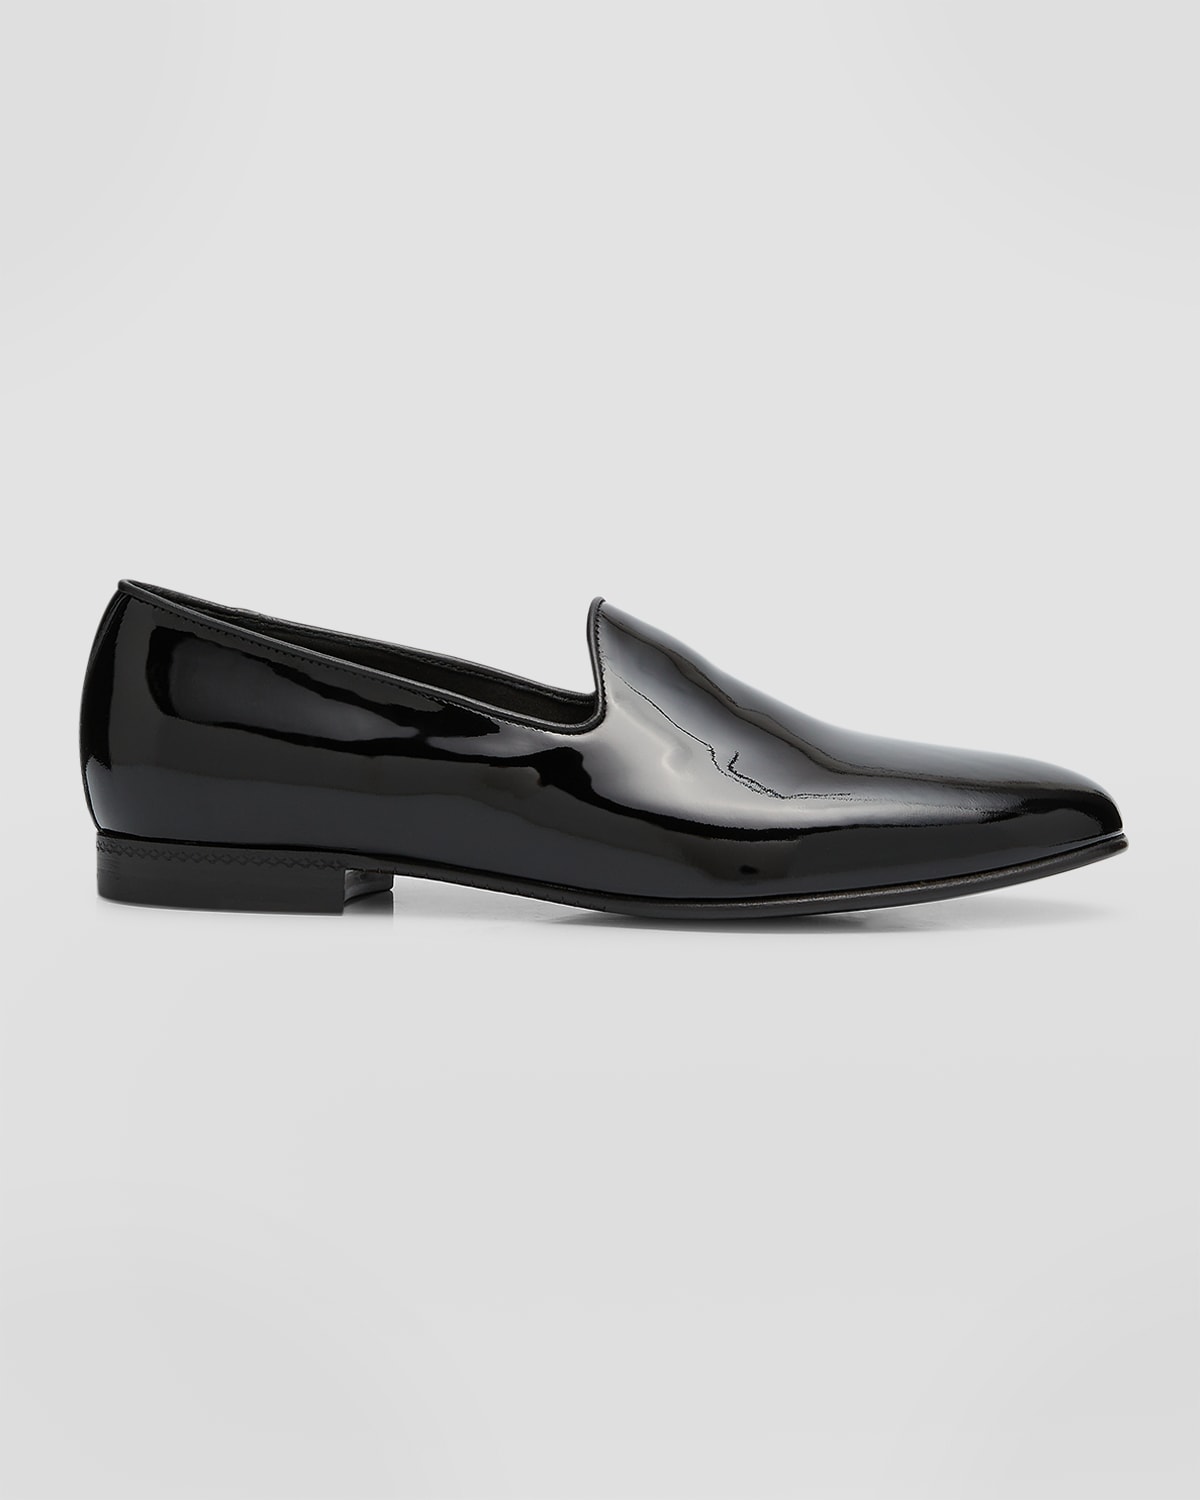 Zegna Men's Palermo Pantent Leather Loafers In Black